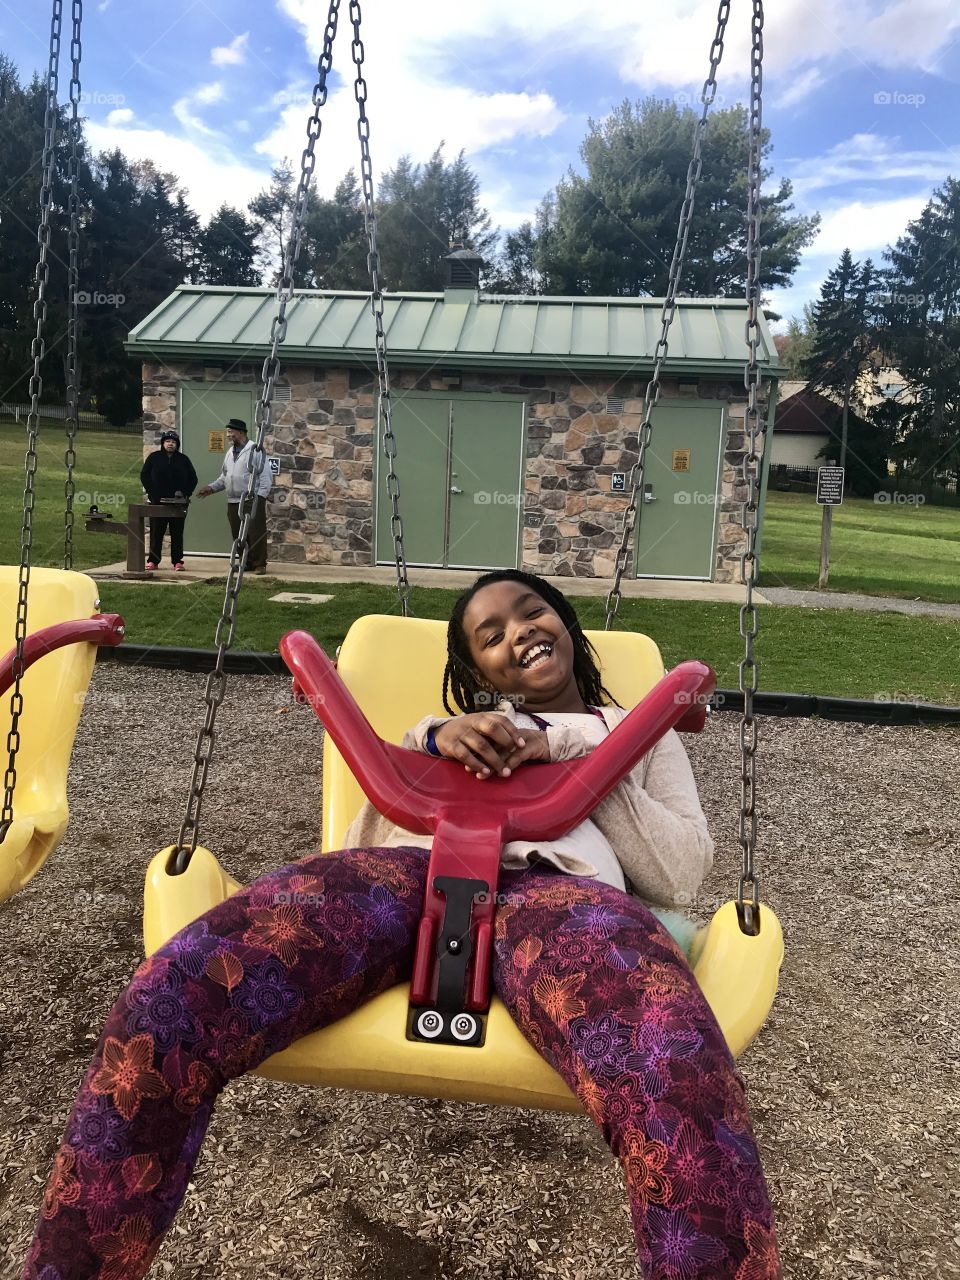 Child in Large Playground Swing Smiling